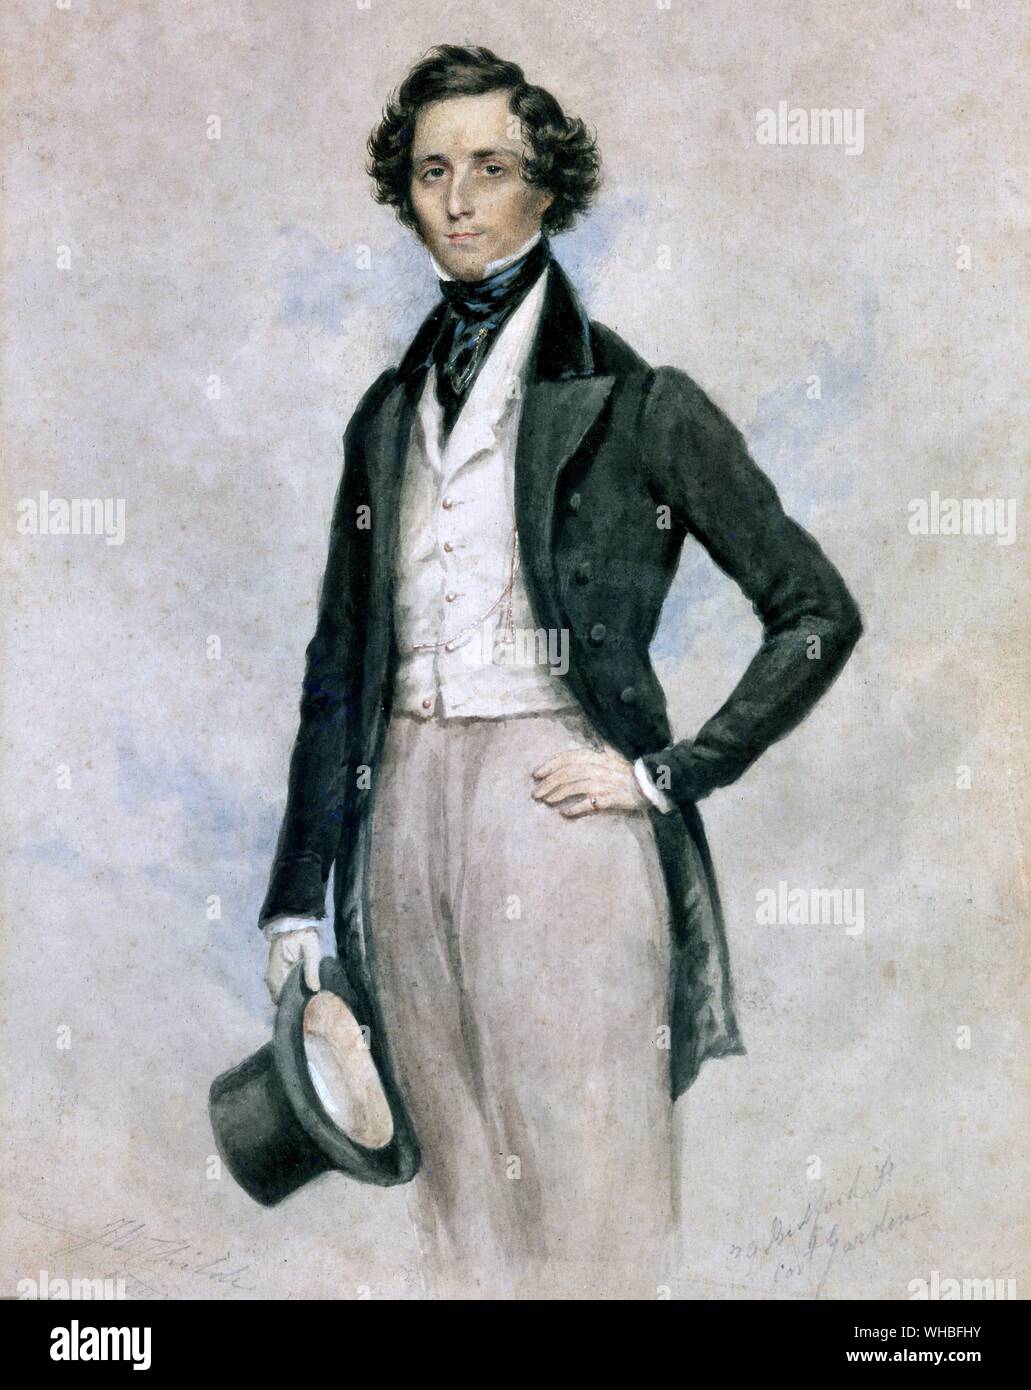 Felix Mendelssohn (aged 20) - Portrait of an Elegant Gentleman c.1825 - watercolour by James Warren Childe (1778-1862). Jakob Ludwig Felix Mendelssohn Bartholdy, born and generally known as Felix Mendelssohn (February 3, 1809 - November 4, 1847) was a German composer, pianist and conductor of the early Romantic period.. Stock Photo